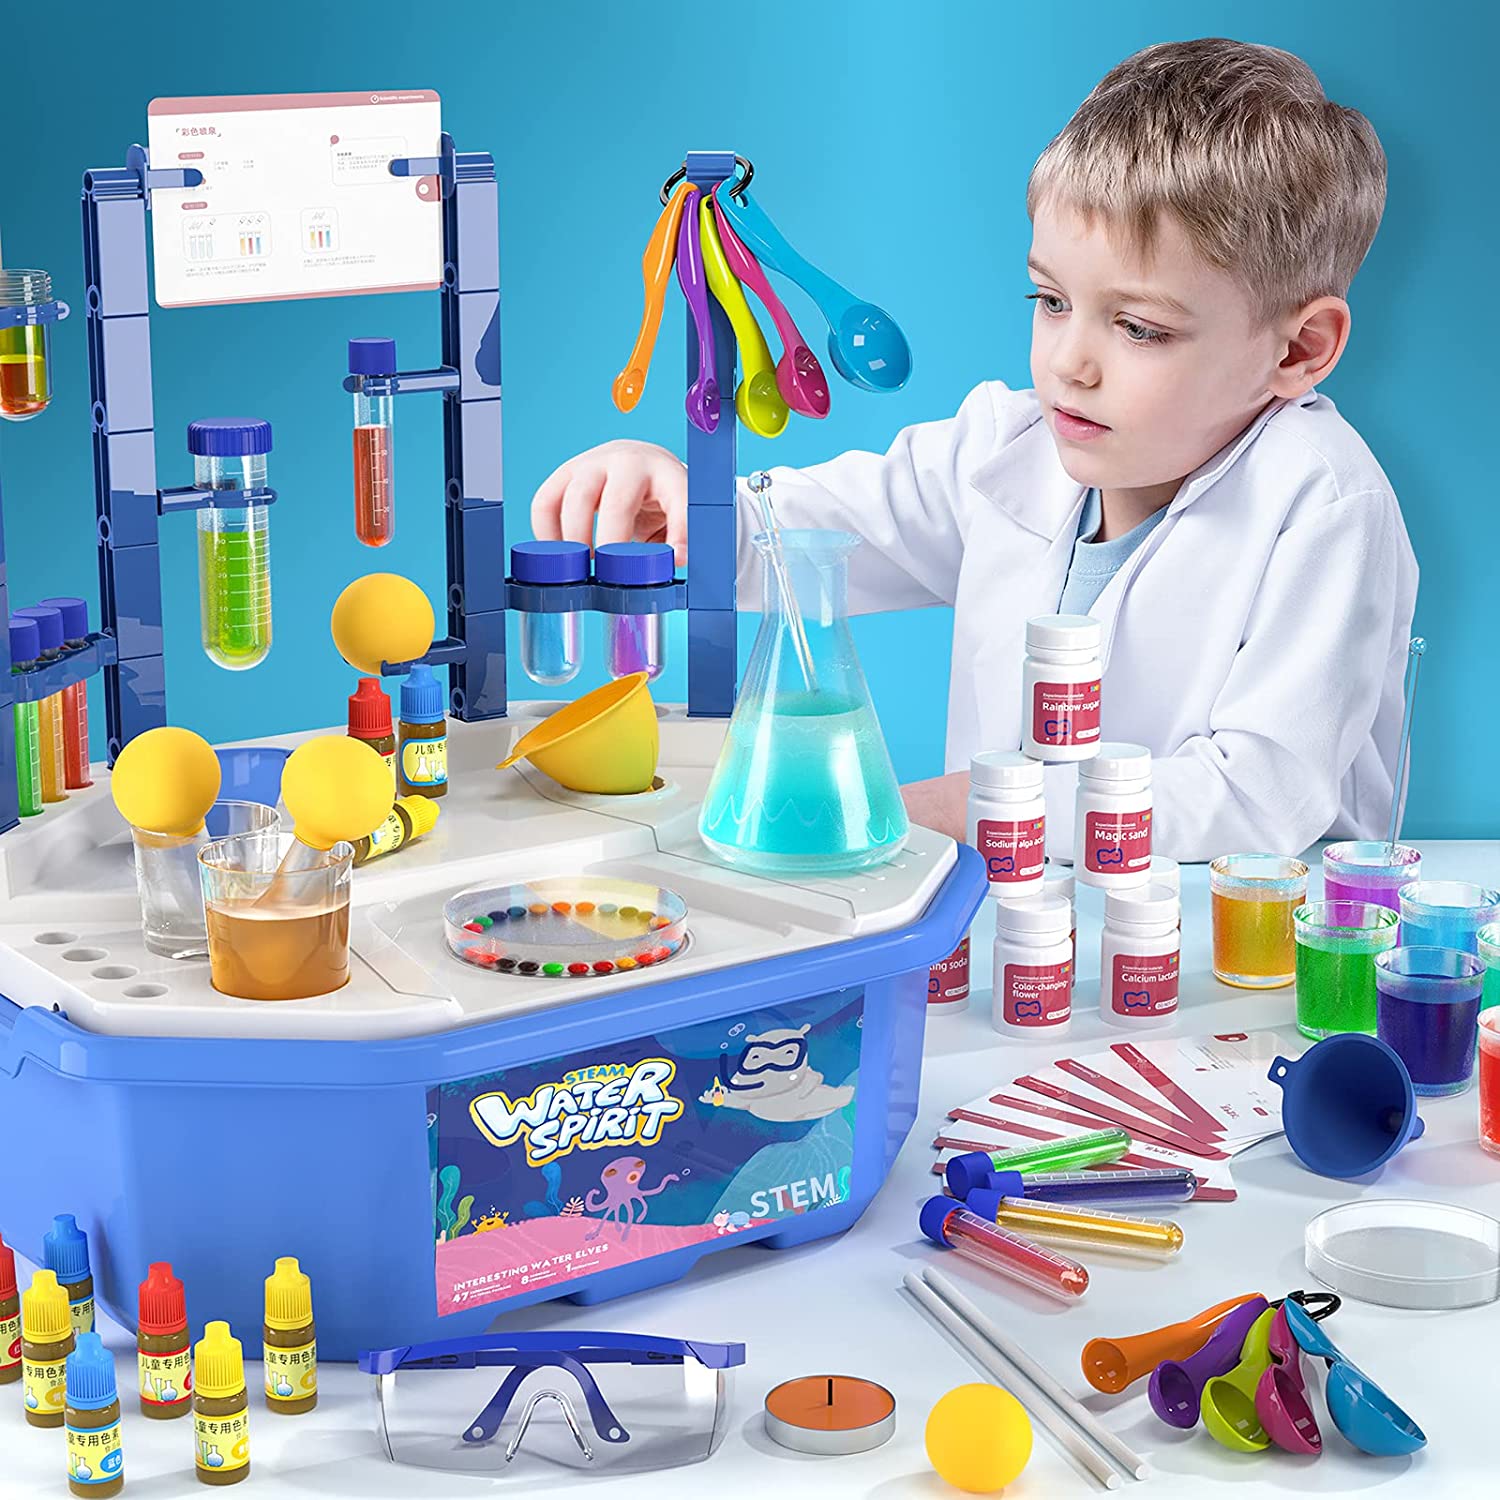 70 Lab Experiments Science Kits for Kids Age 4-6-8-12 Educational Scien